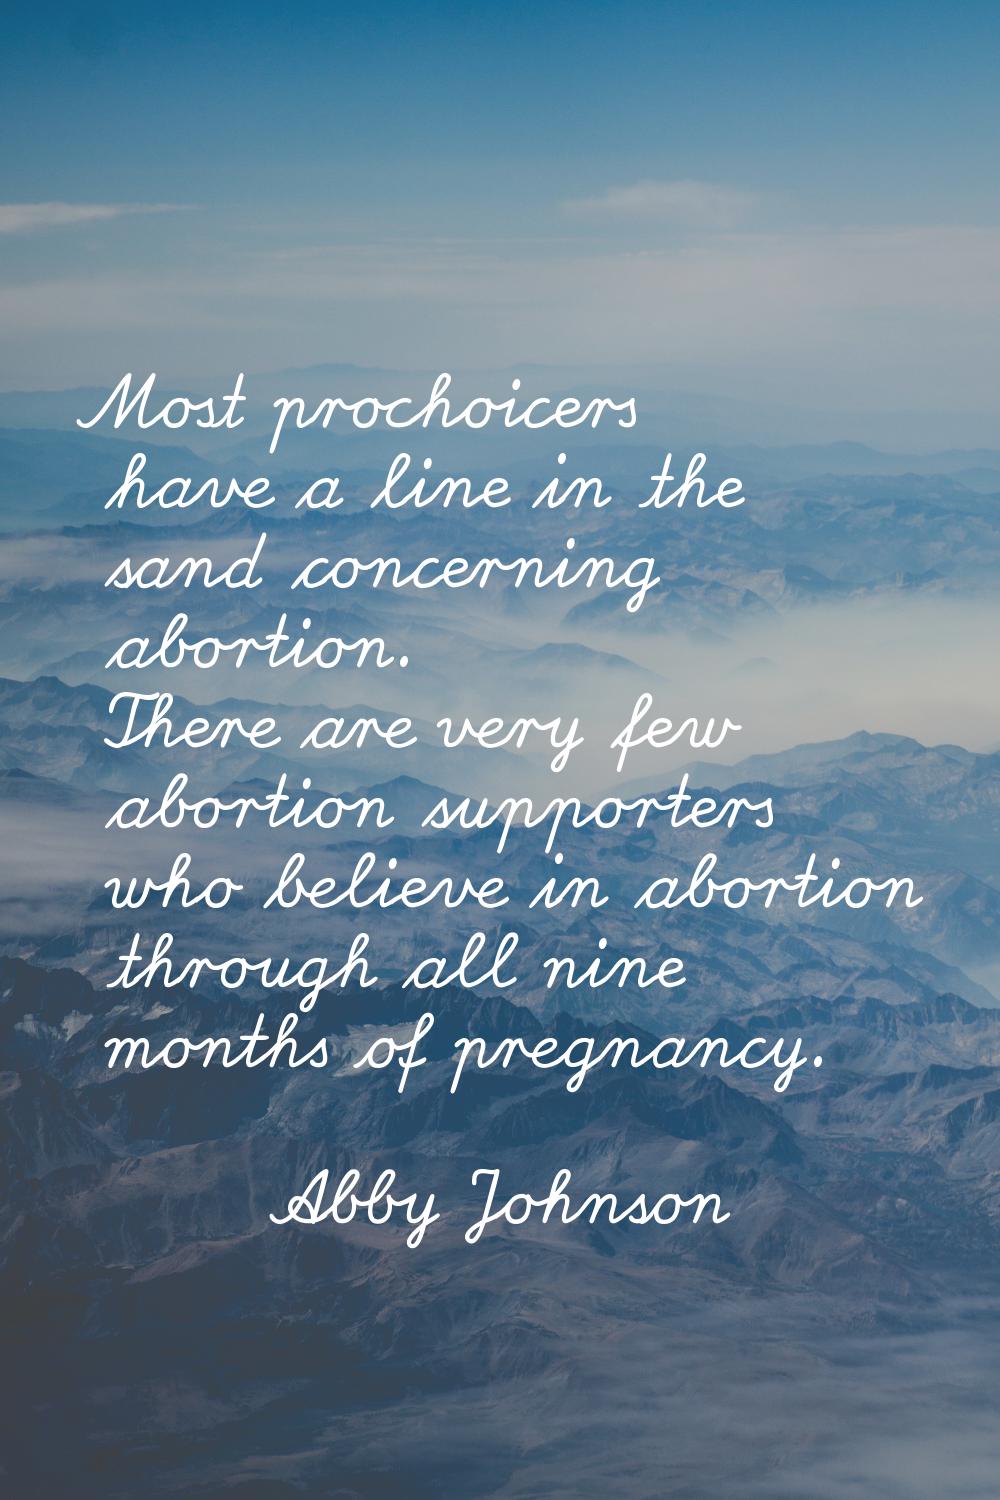 Most prochoicers have a line in the sand concerning abortion. There are very few abortion supporter